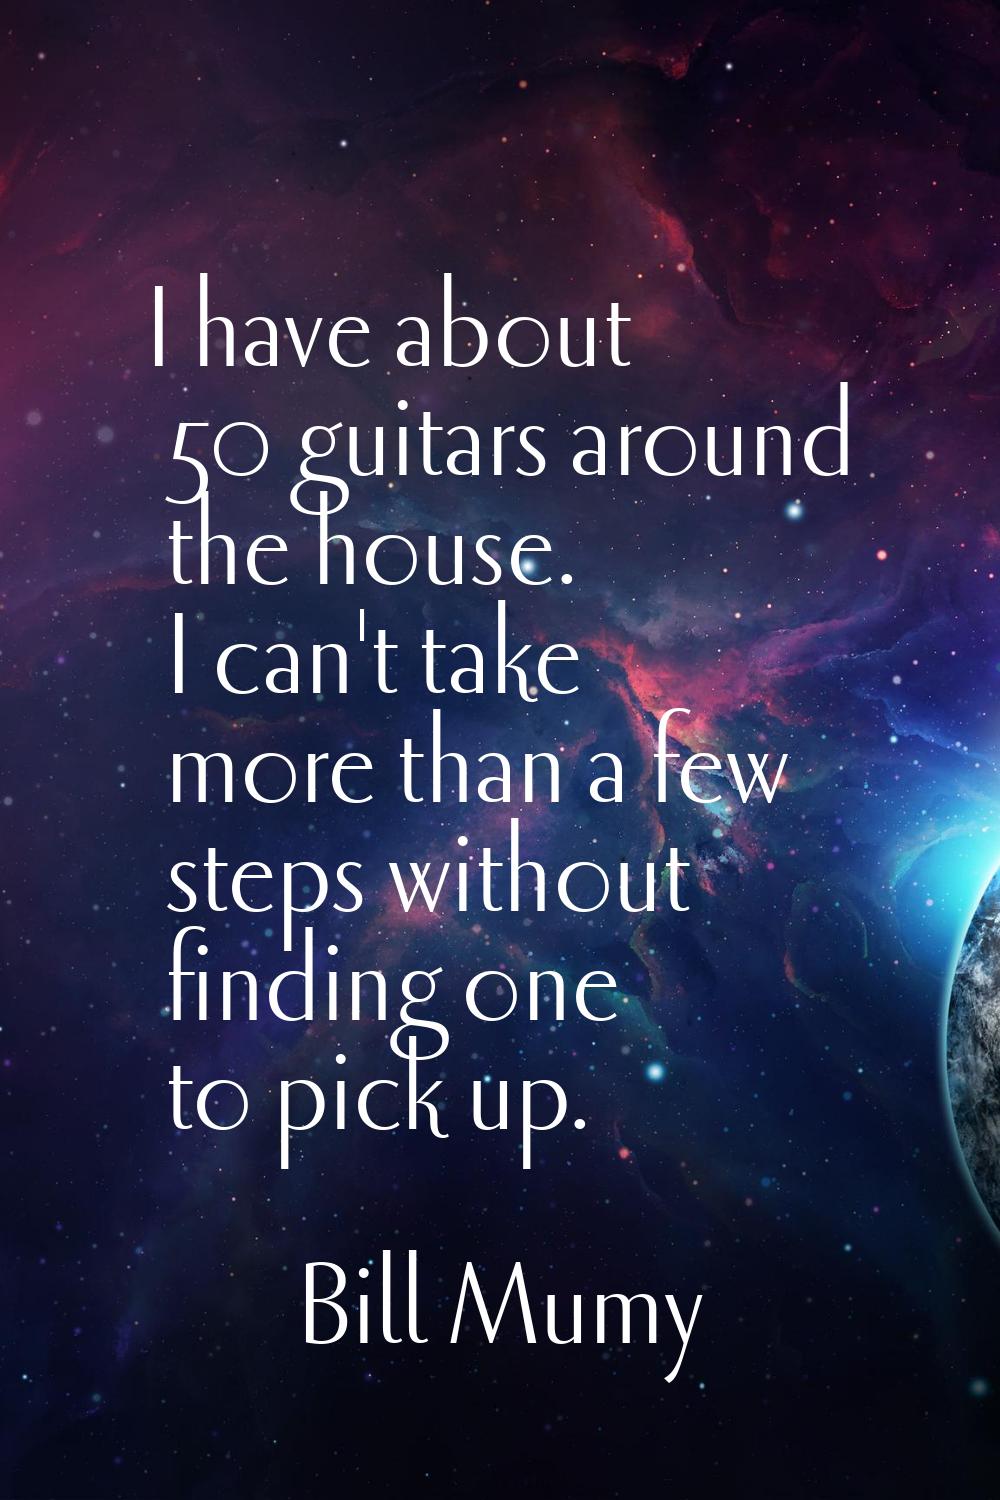 I have about 50 guitars around the house. I can't take more than a few steps without finding one to